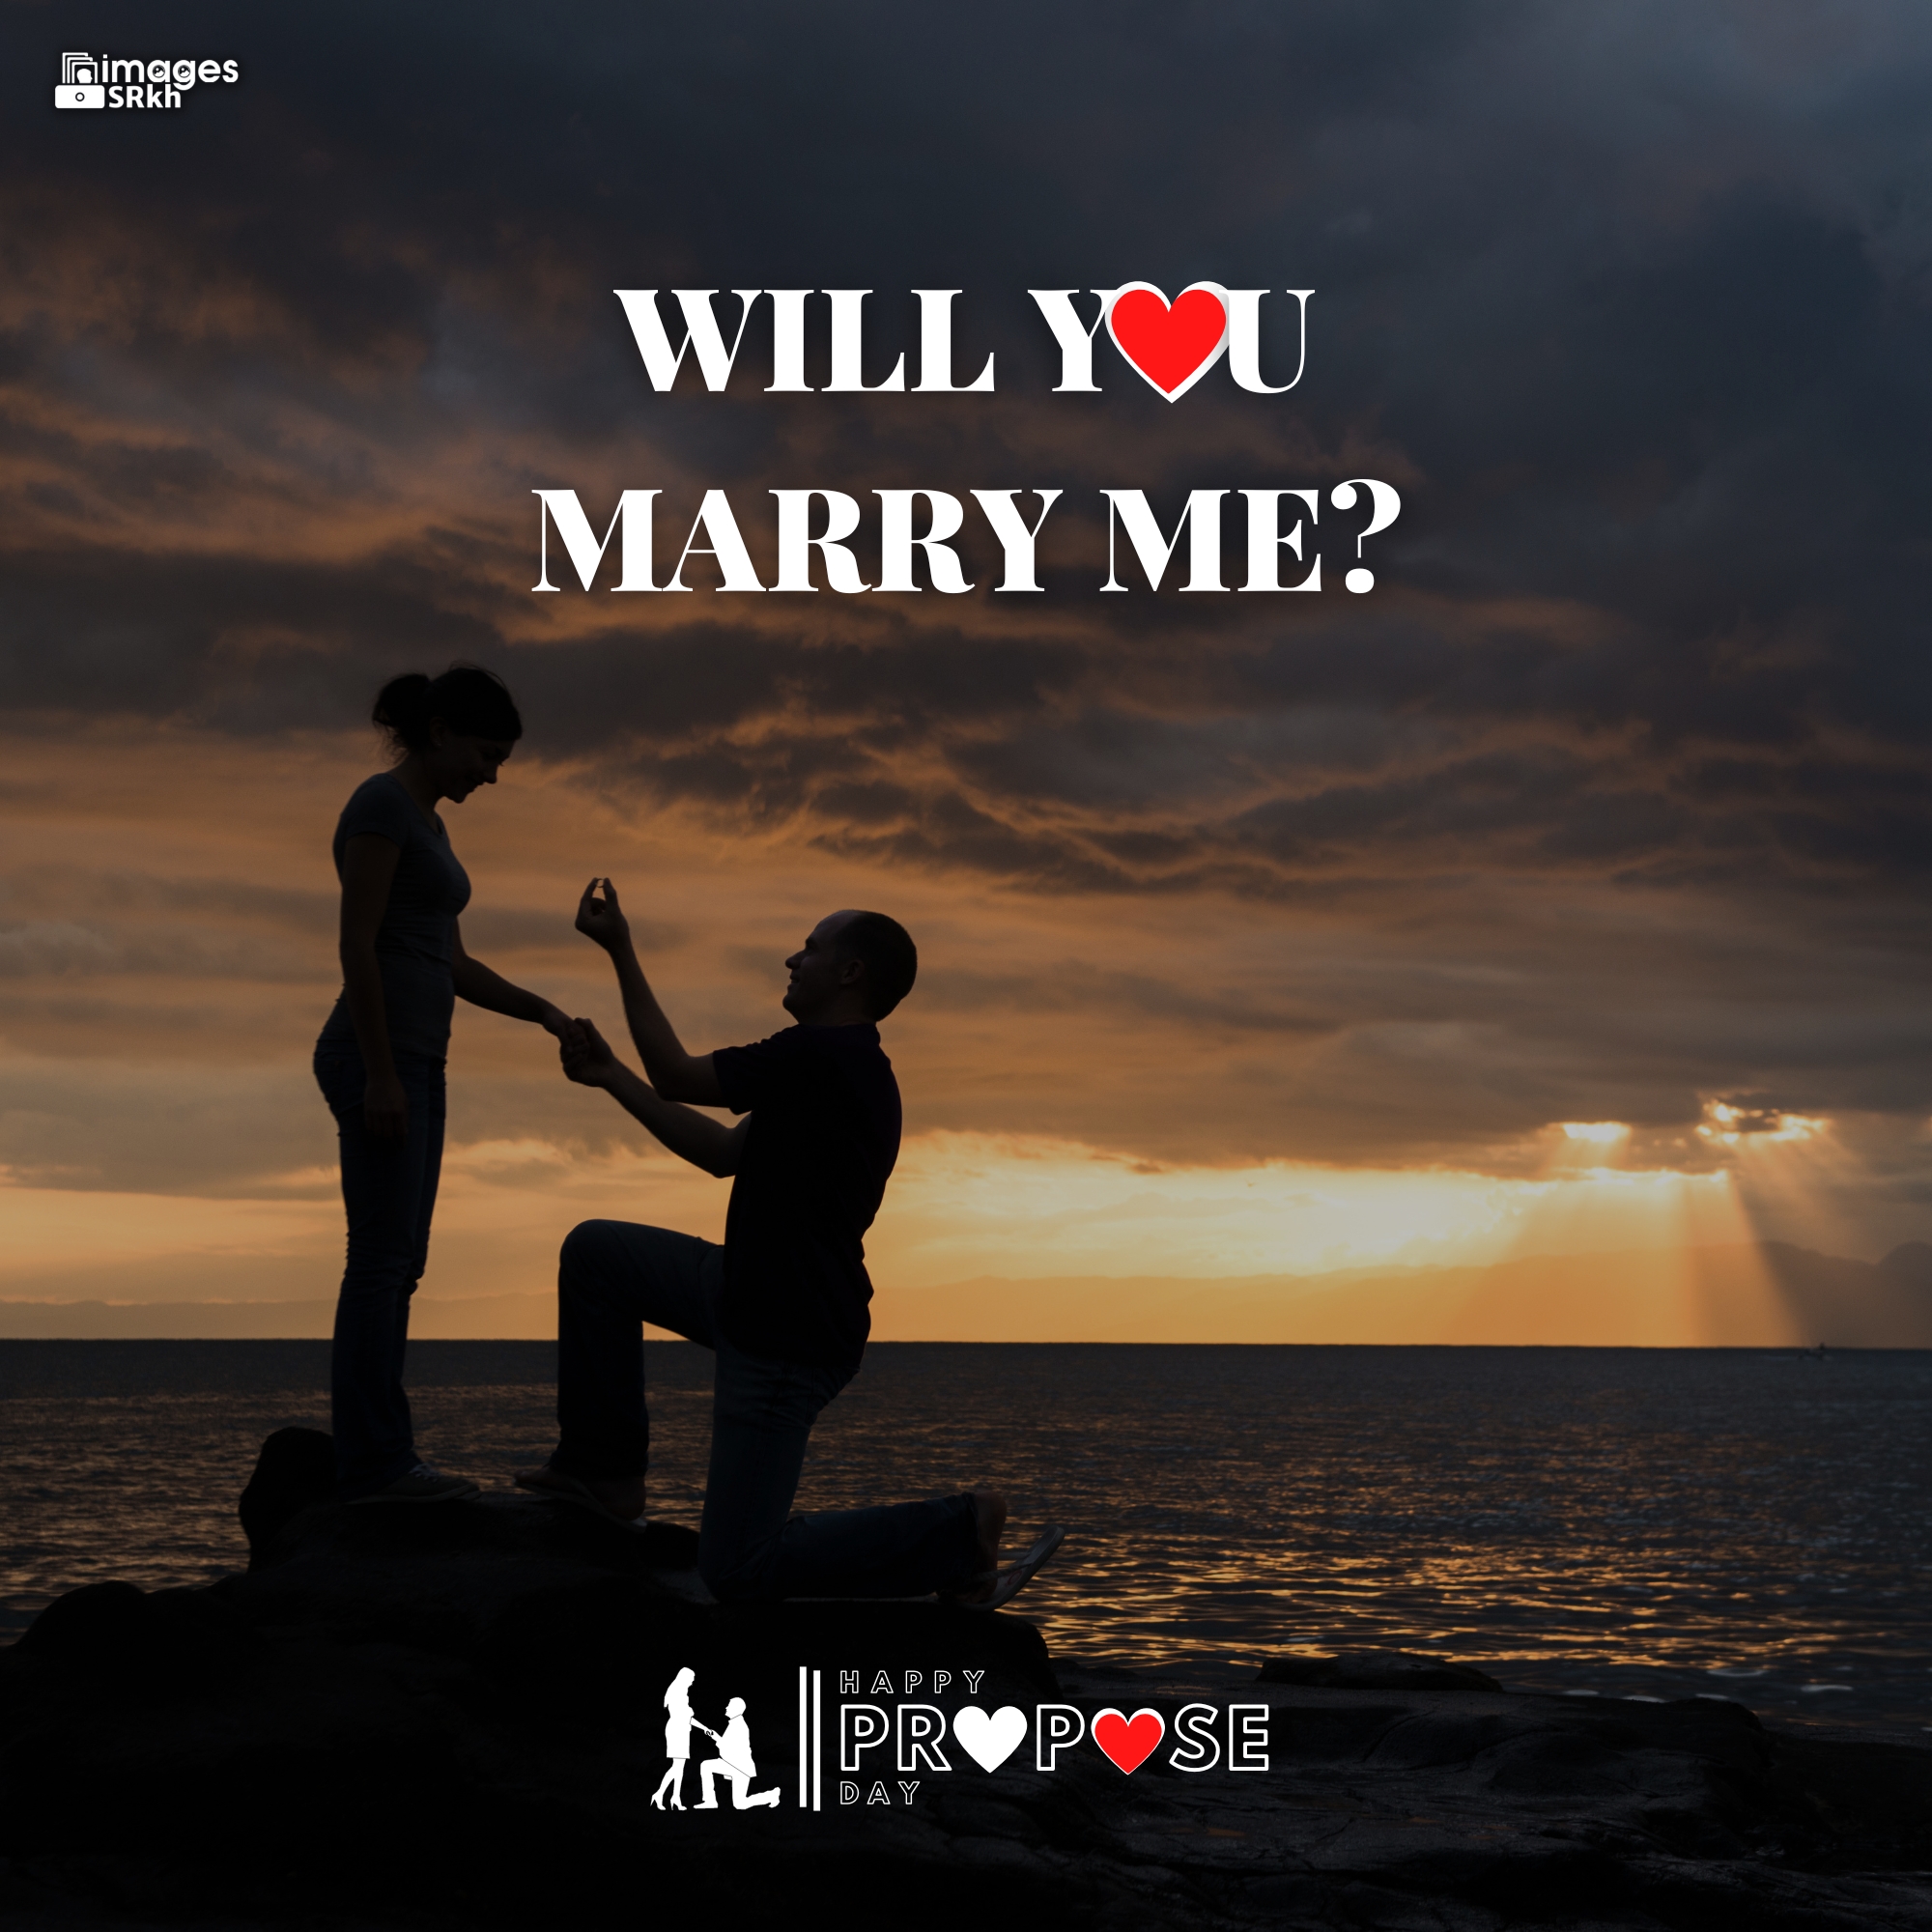 Propose Day Images | 258 | Will You MARRY ME